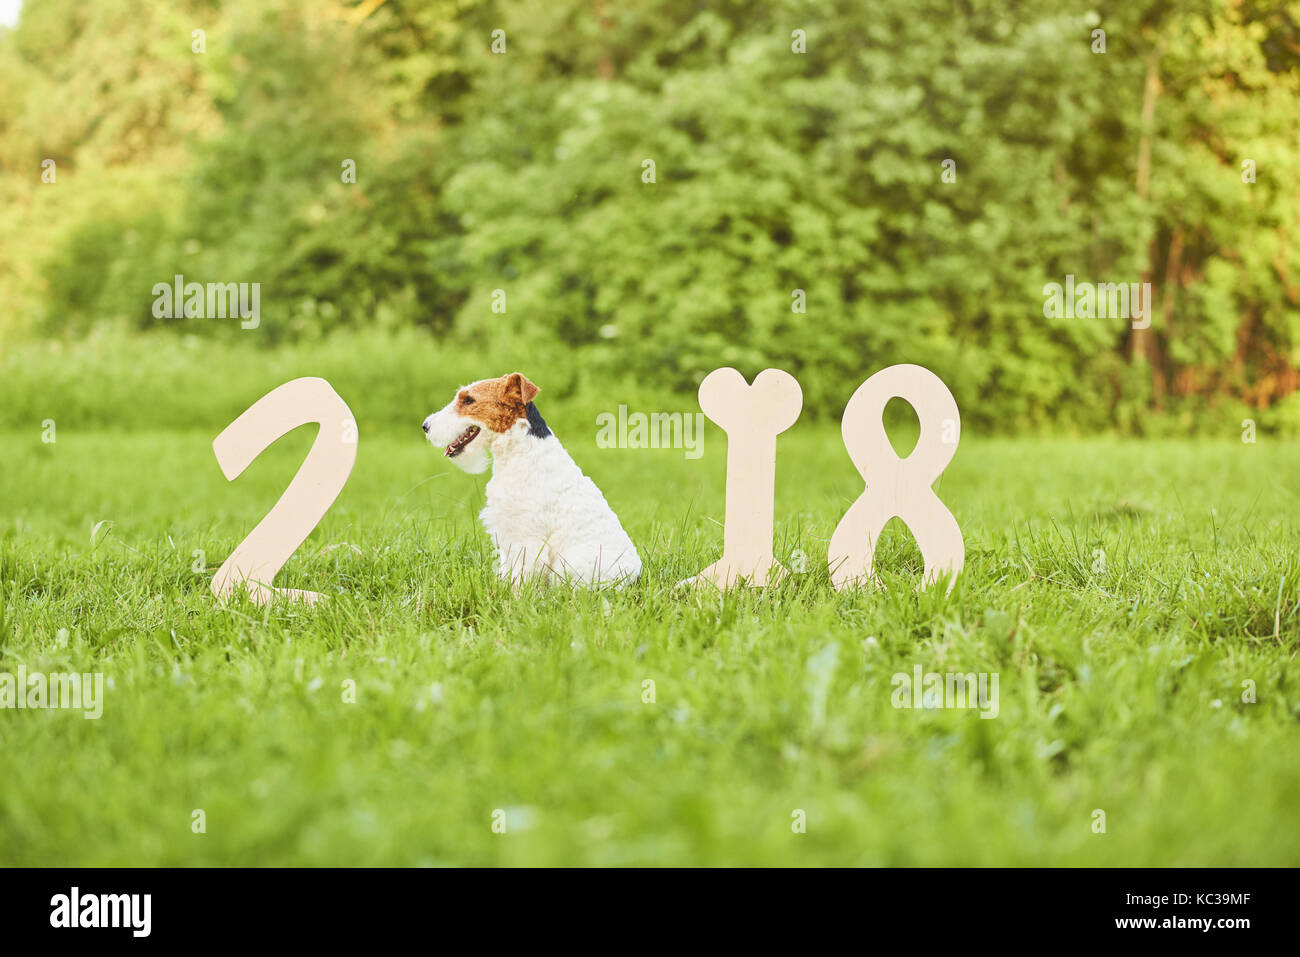 Adorable happy fox terrier dog at the park 2018 new year greetin Stock Photo